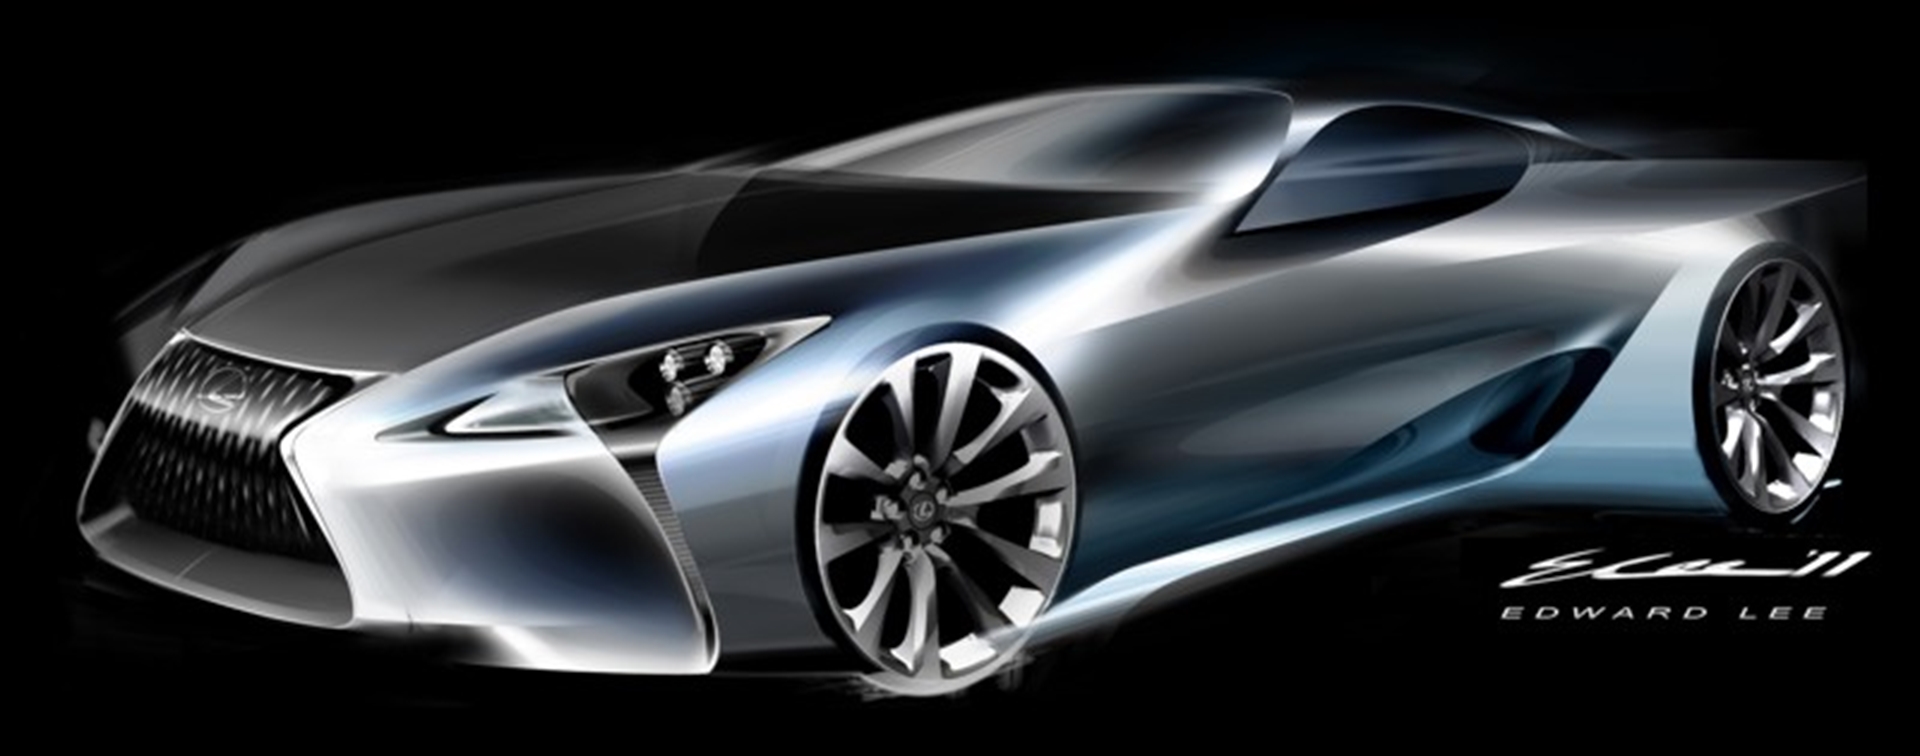 NAIAS – THE “EYES” HAVE IT: LEXUS LF-LC NAMED TOP DESIGN CONCEPT AT DETROIT MOTOR SHOW